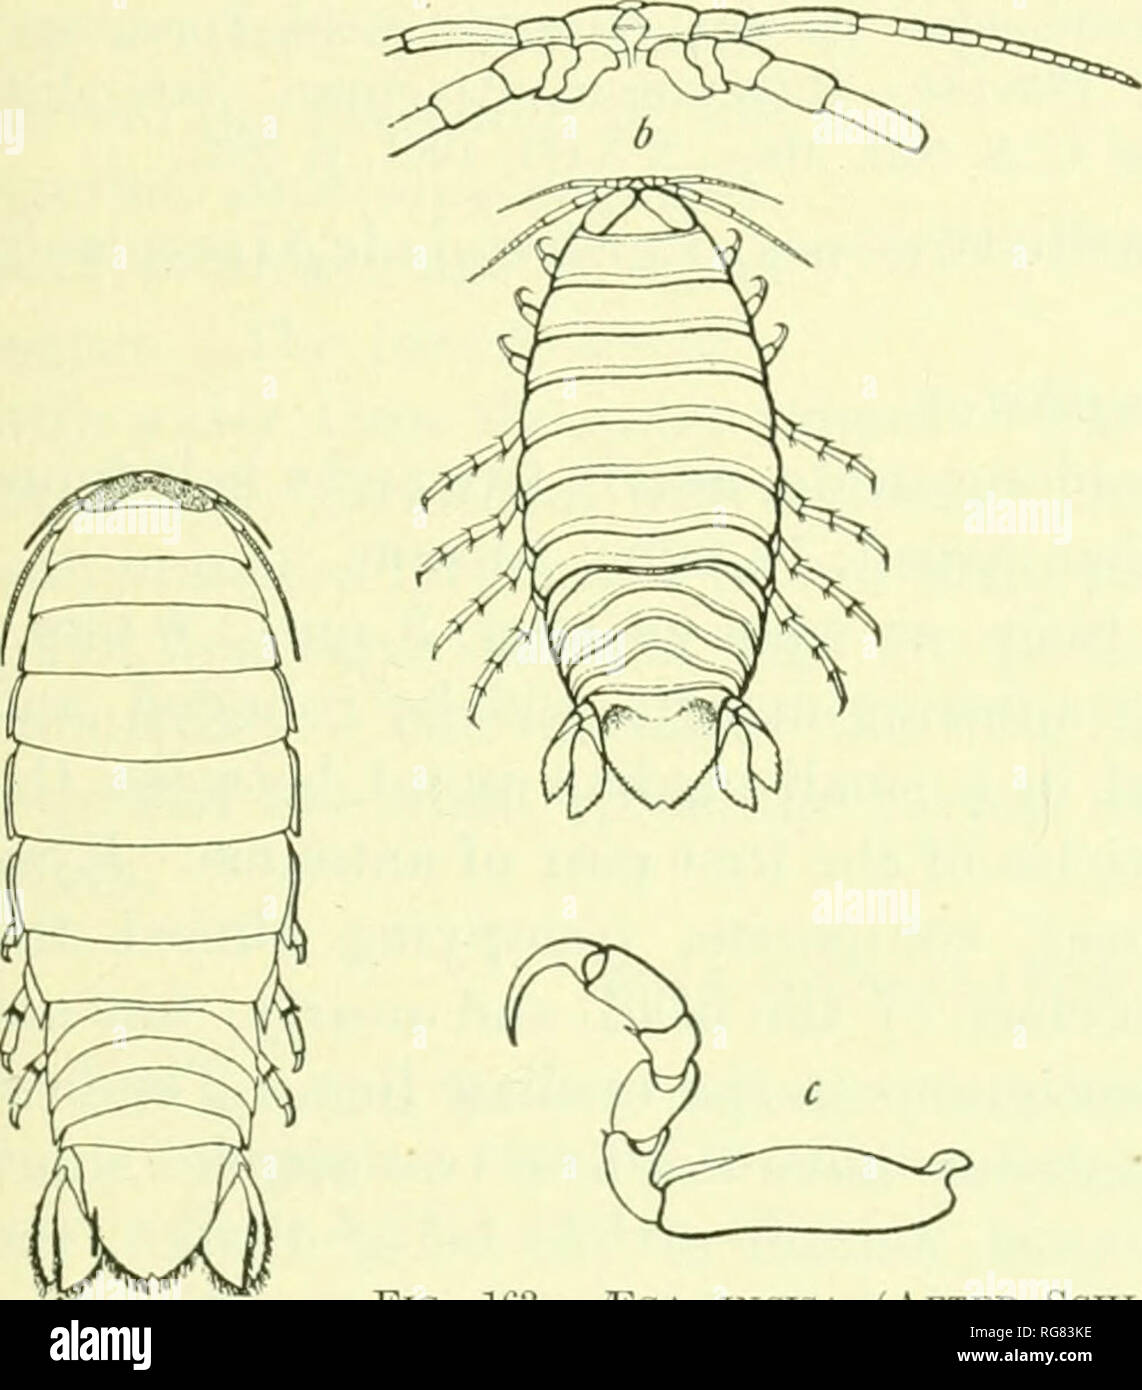 . Bulletin - United States National Museum. Science. ISOPODS OF NORTH AMERICA. 181 The first antennae extend to the posterior margin of the first thoracic segment. The first two articles of the peduncle of the second pair of antenna are short and about ecpial in Icnigth; tlie third is a little longer than the second; the fourth and fifth are subequal and each about twice as long as the third.' The fiagellum is conn)()sed of fifteen articles. The second pair of antenna' extend a little beyond the pos- terior margin of the second thoracic segment. The maxilliped has a palp of five articles. The  Stock Photo